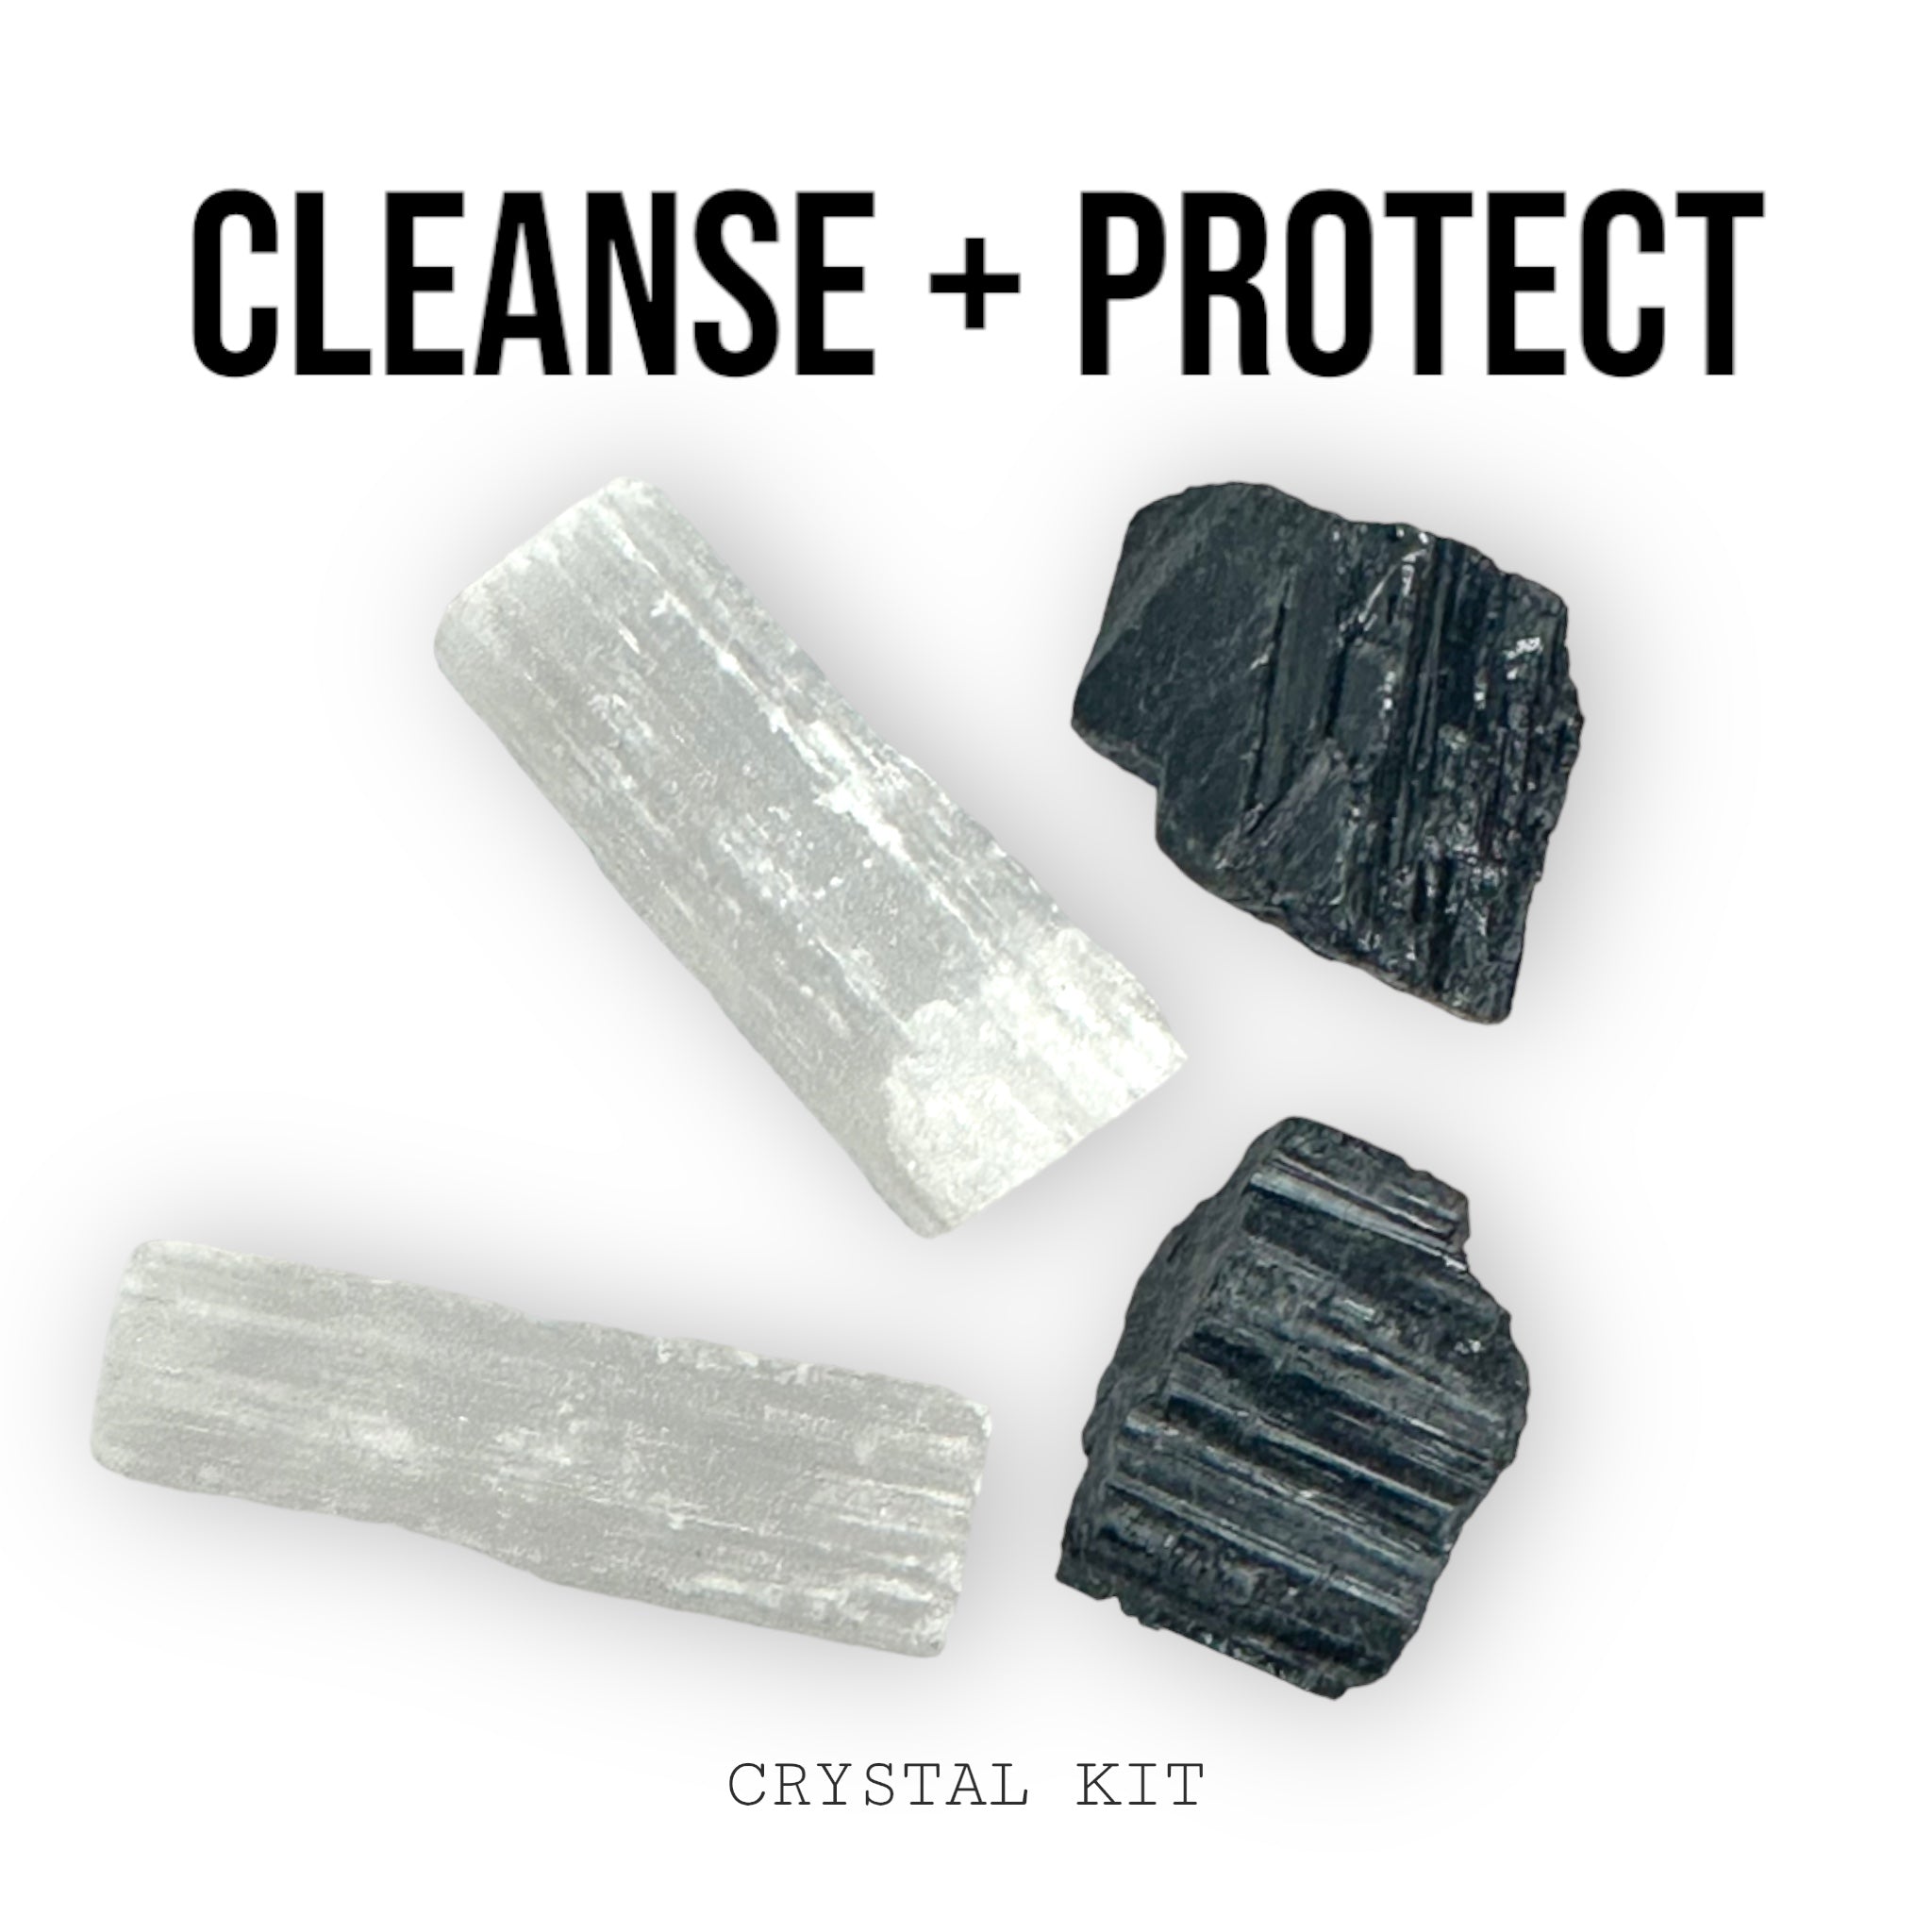 CLEANSING + PROTECTING:: Cleanse + Protect Crystal Kit